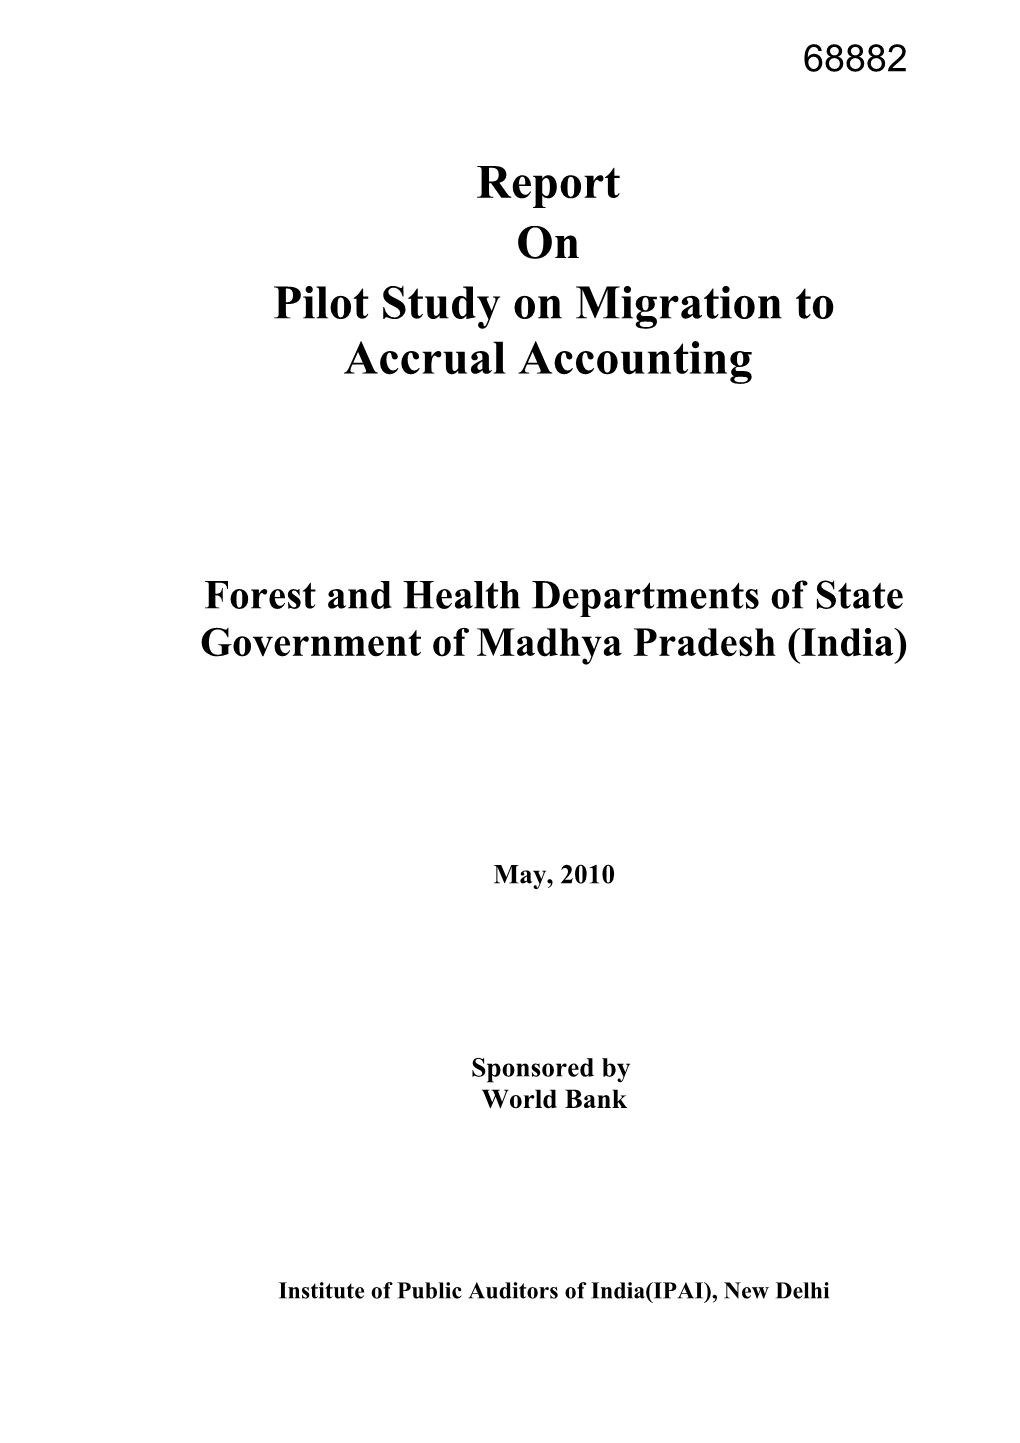 Forest and Health Departments of State Government of Madhya Pradesh (India)